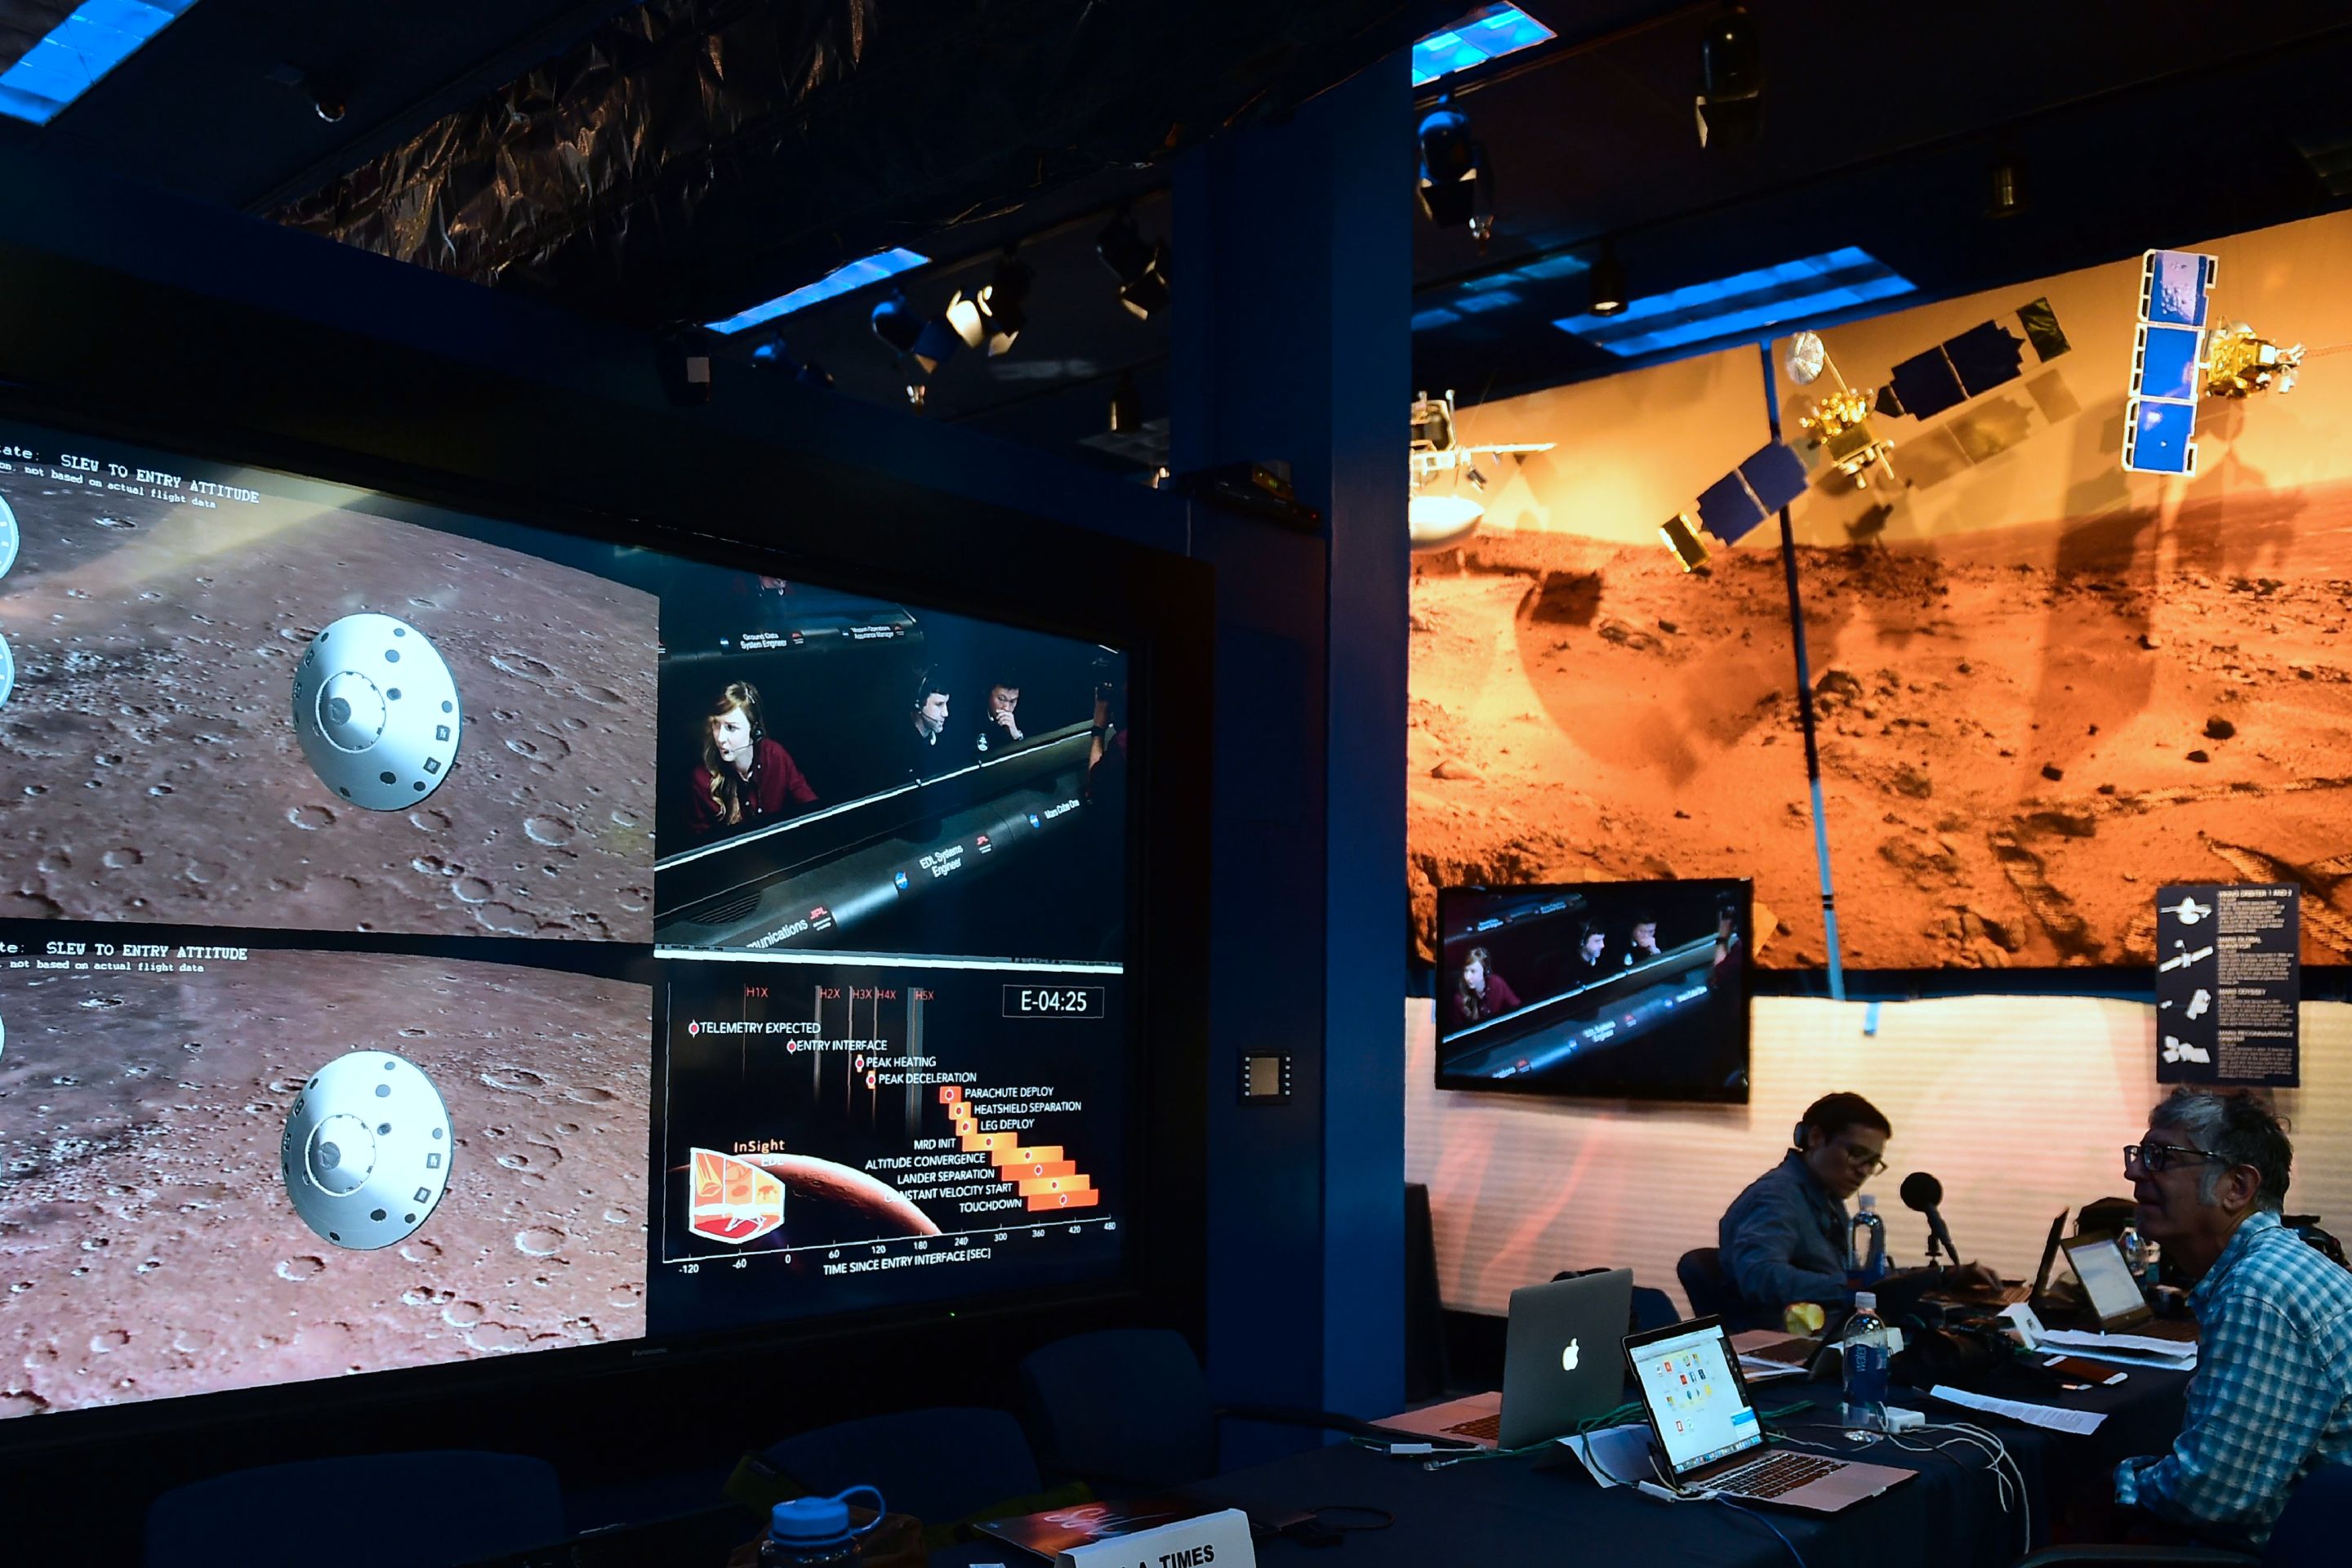 People watch the landing of NASA's InSight spacecraft on the planet Mars on television screens at NASA's Jet Propulsion Laboratory (JPL) in Pasadena, California on November 26, 2018. - Cheers and applause erupted at NASA's Jet Propulsion Laboratory as a $993 million unmanned lander, called InSight, touched down on the Red Planet and managed to send back its first picture. (Photo by Frederic J. BROWN / AFP) (Photo credit should read FREDERIC J. BROWN/AFP via Getty Images)